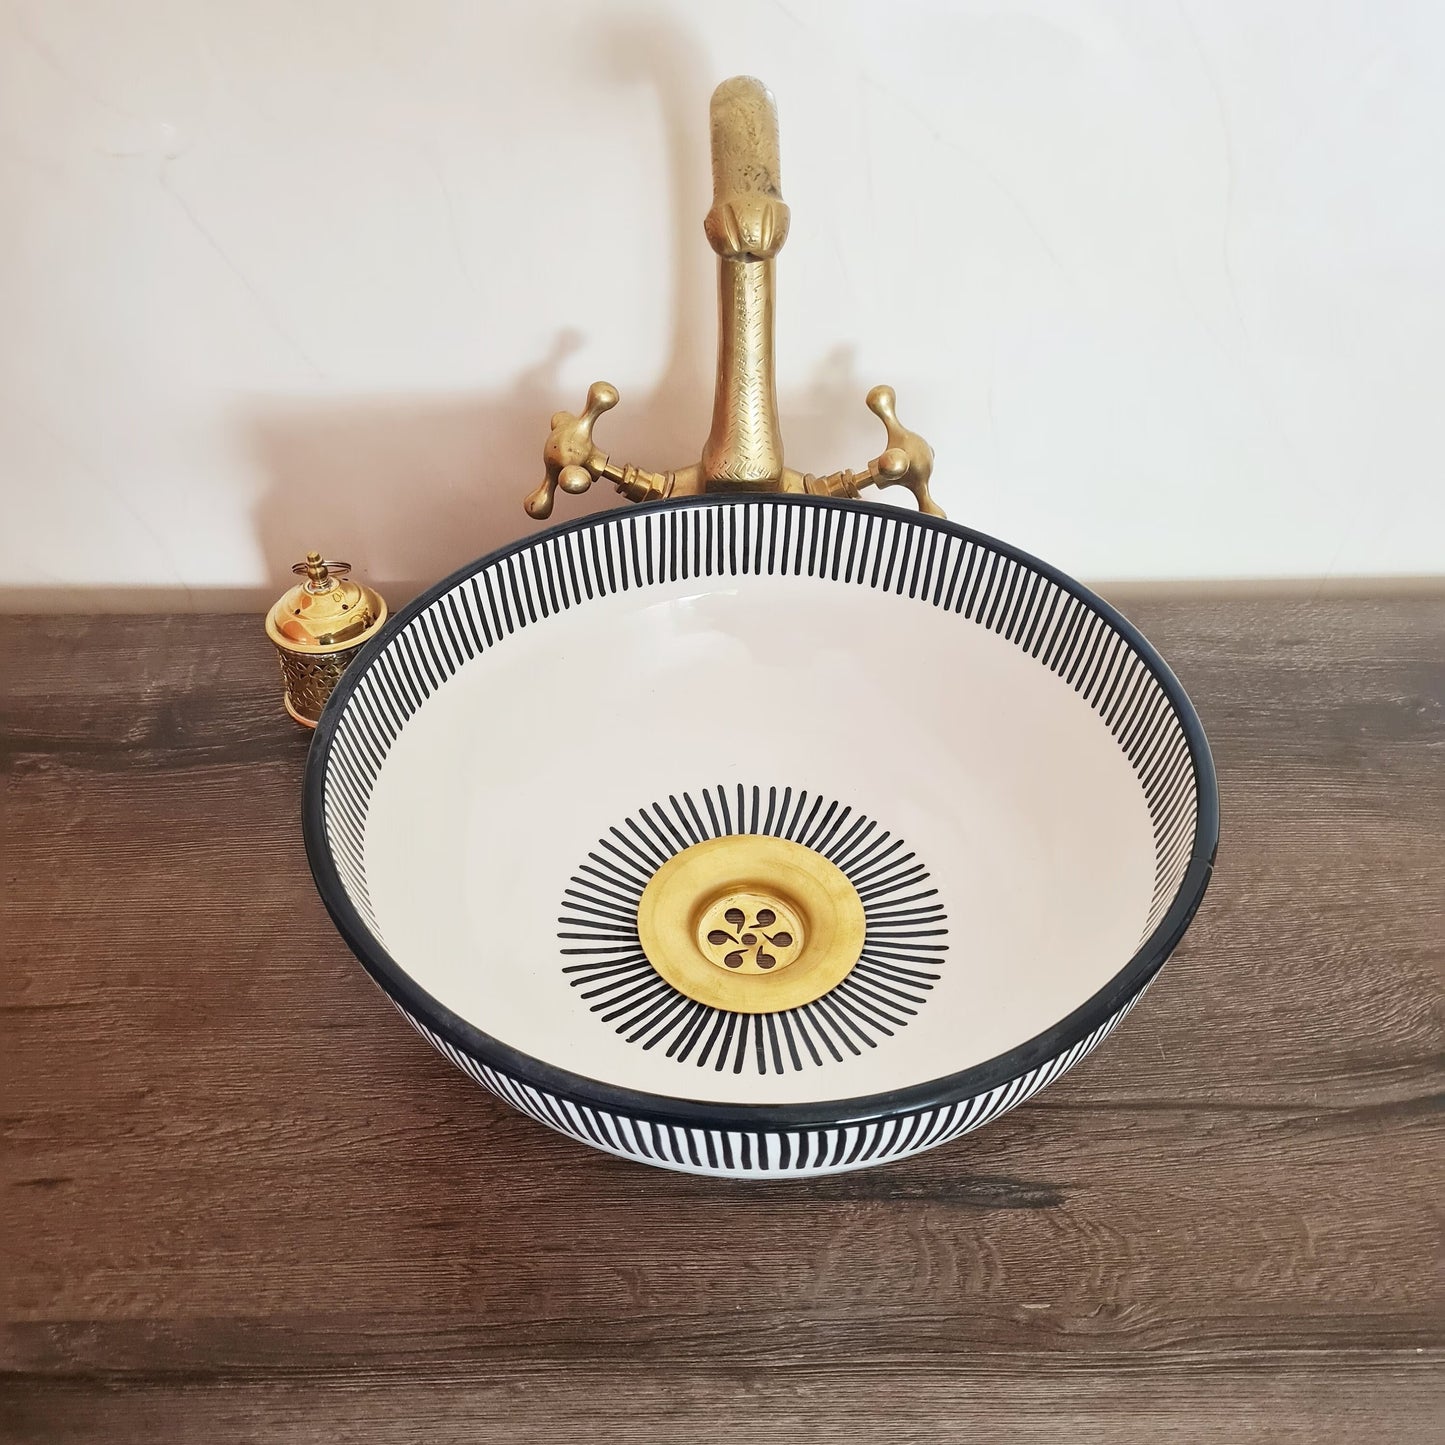 Moroccan sink | moroccan ceramic sink | bathroom sink | moroccan bathroom basin | moroccan sink bowl | Black and white sink bowl #38